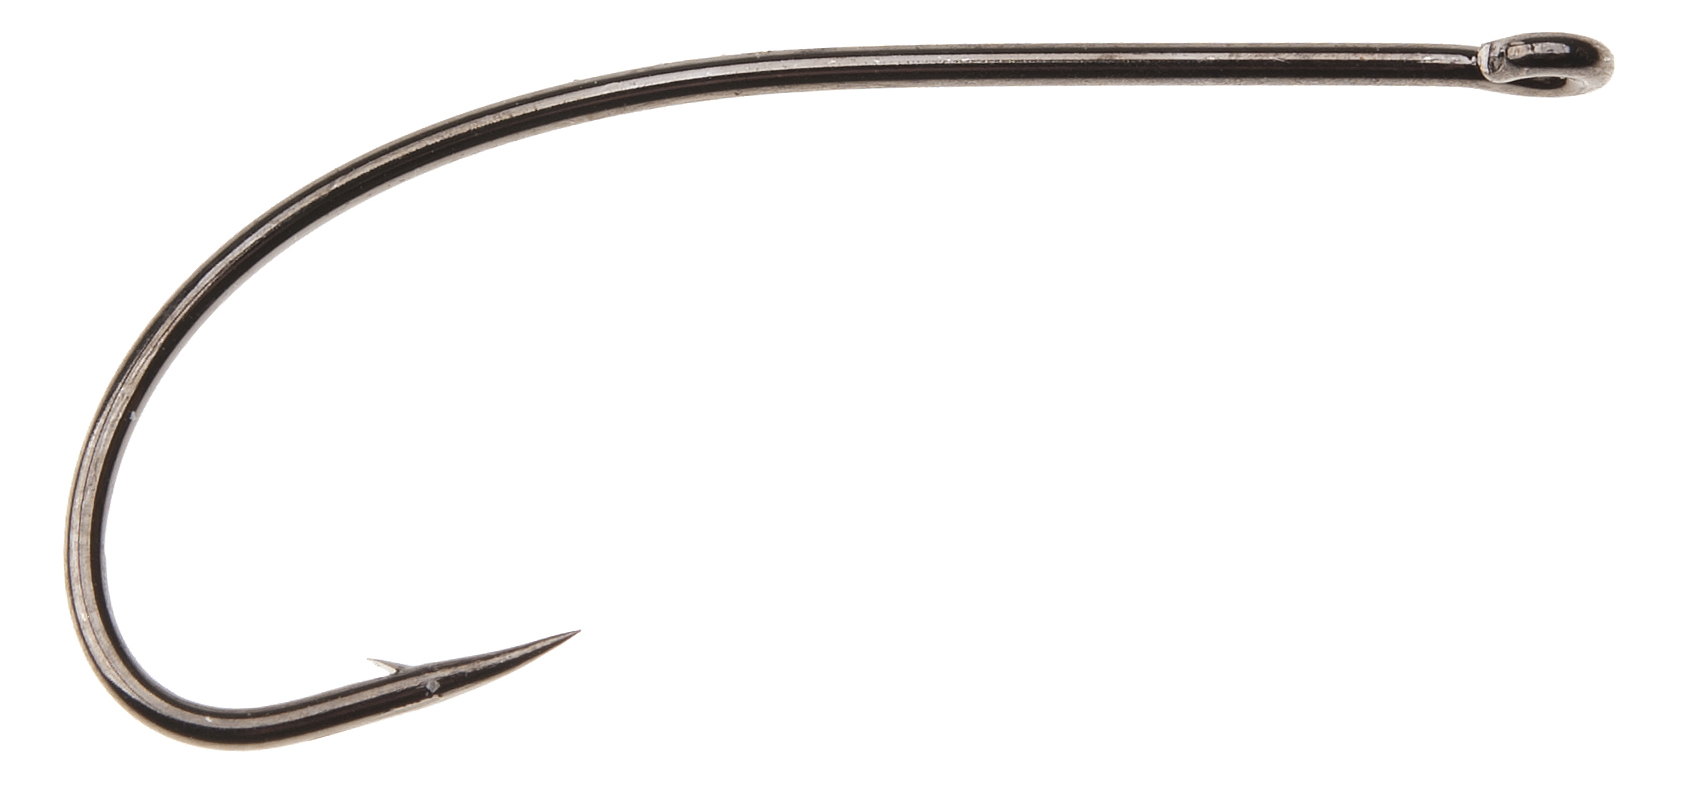 Core C1510 Salmon Egg Hook - CORE Hooks Powered By Ahrex